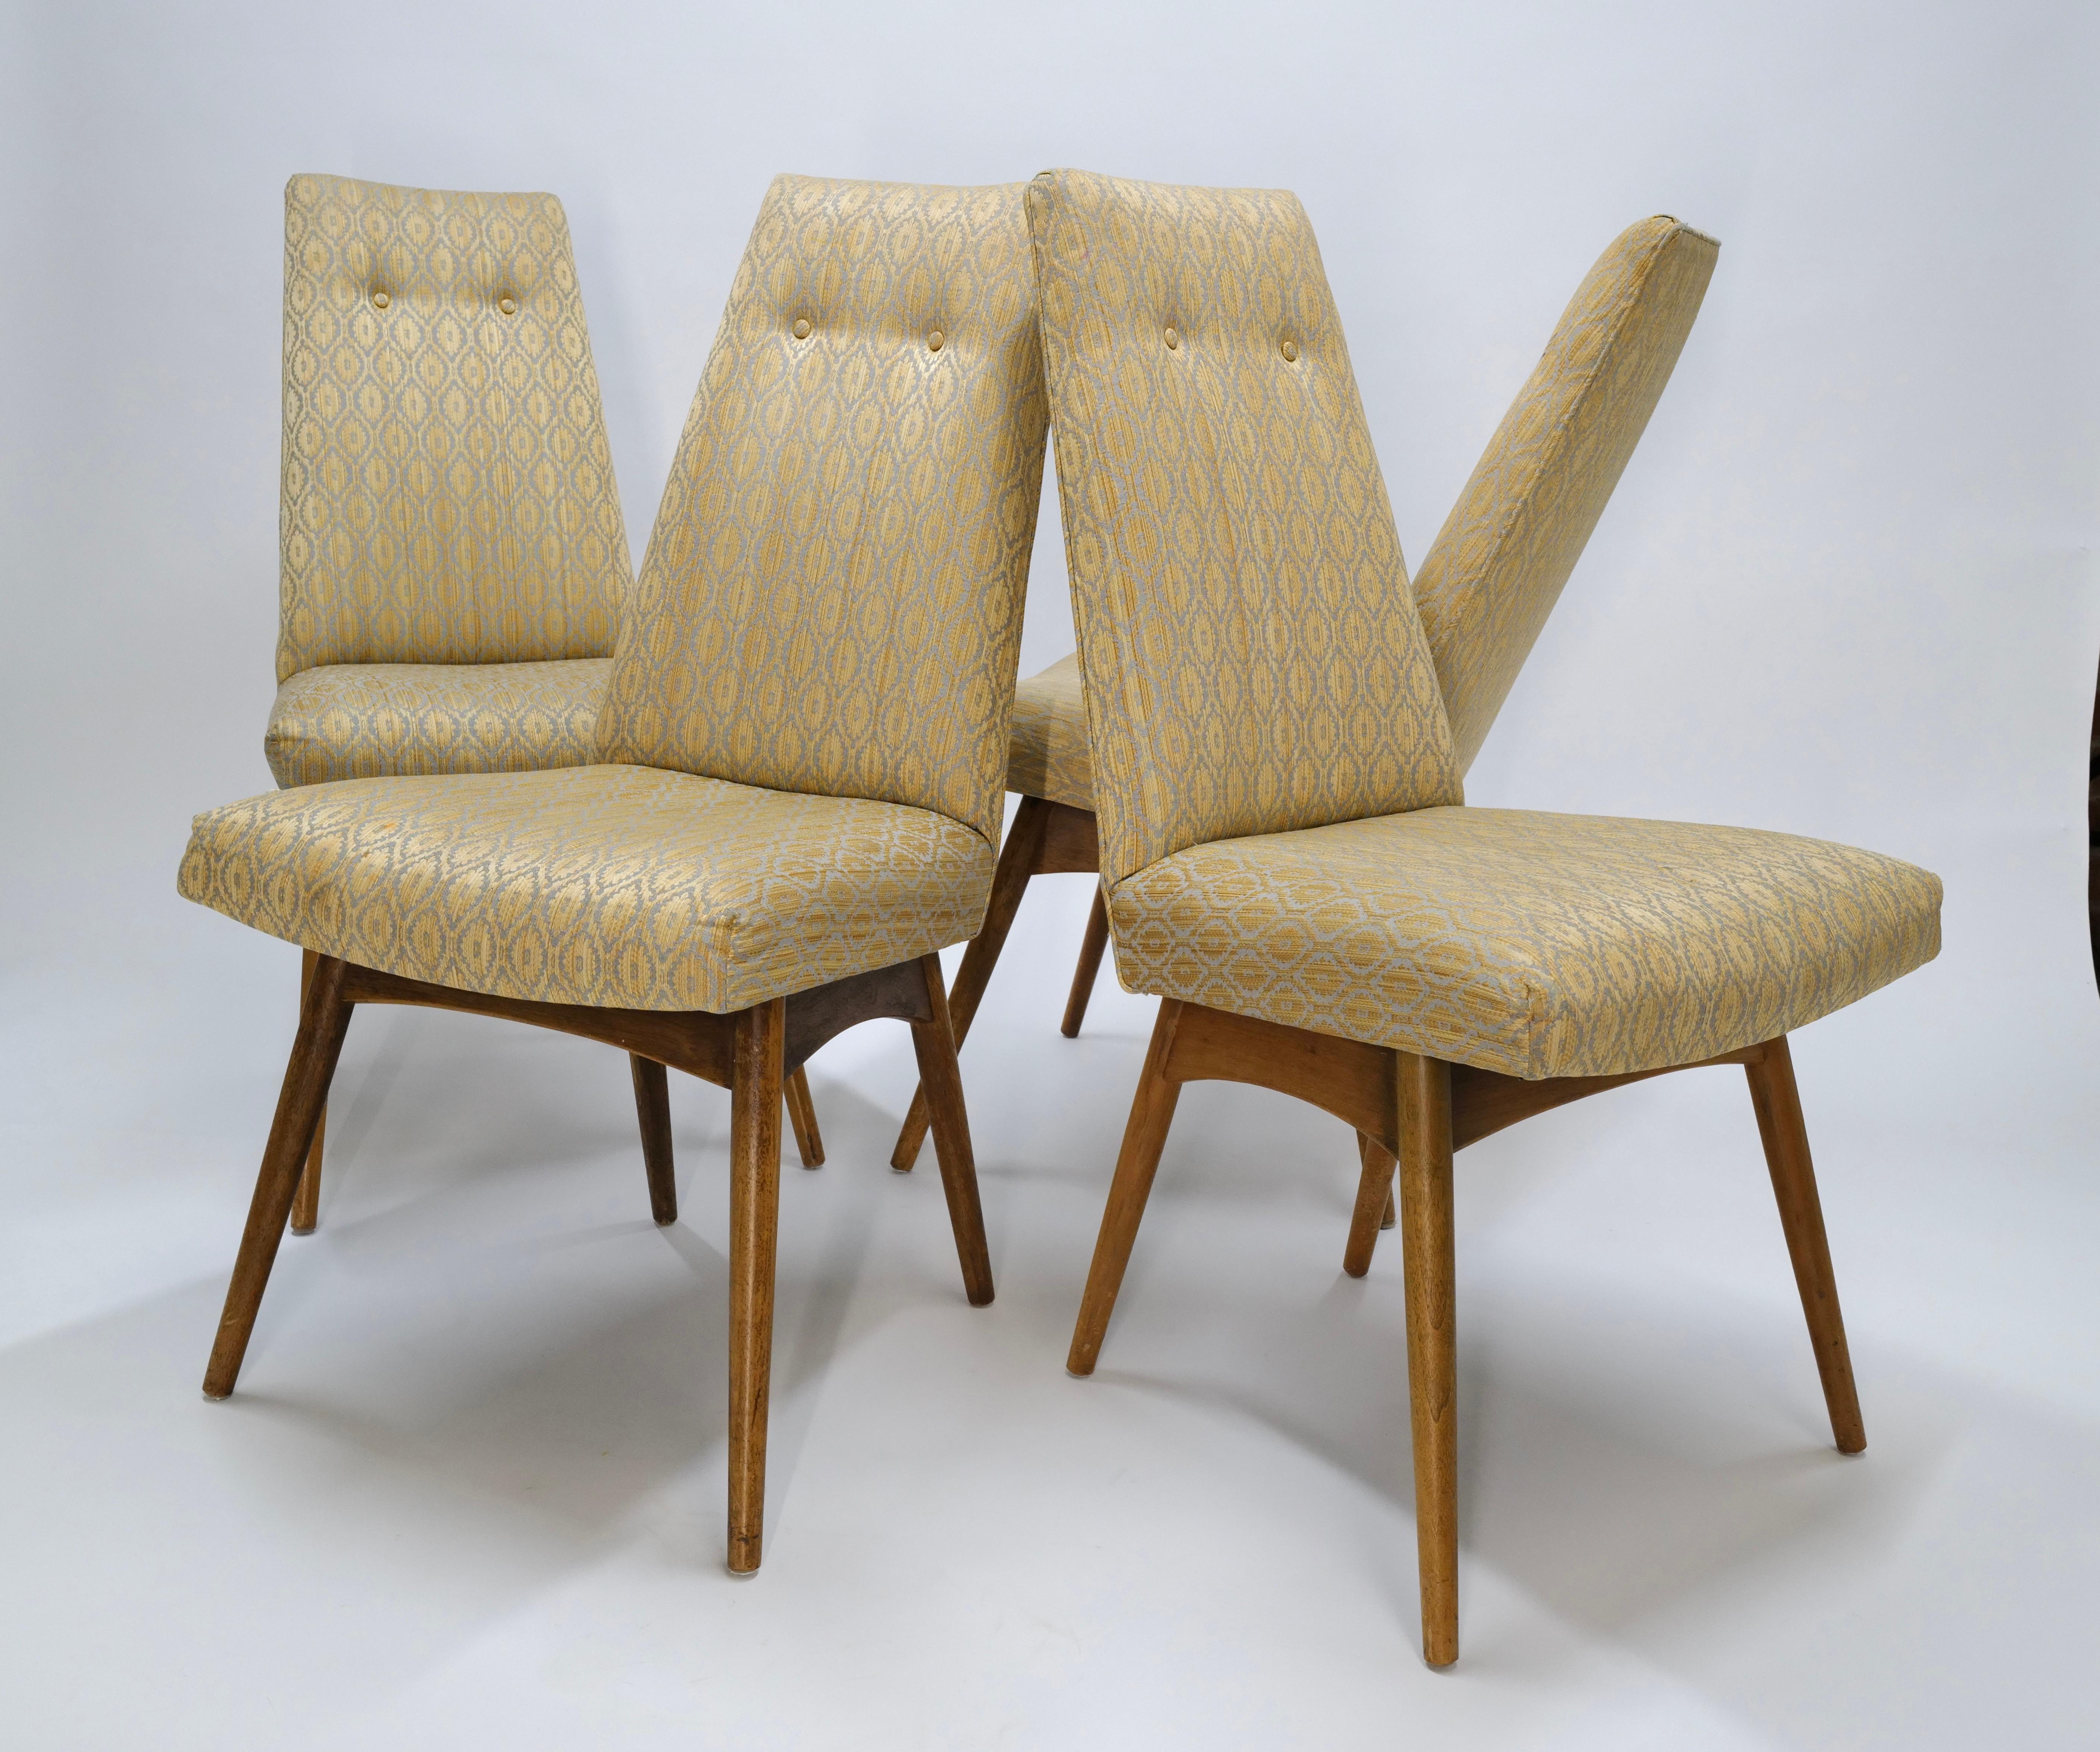 Introducing a set of four Adrian Pearsall dining chairs, a timeless blend of mid-century elegance and modern sophistication. Crafted with sleek lines and sturdy construction, these chairs exude both comfort and style. However, they await the